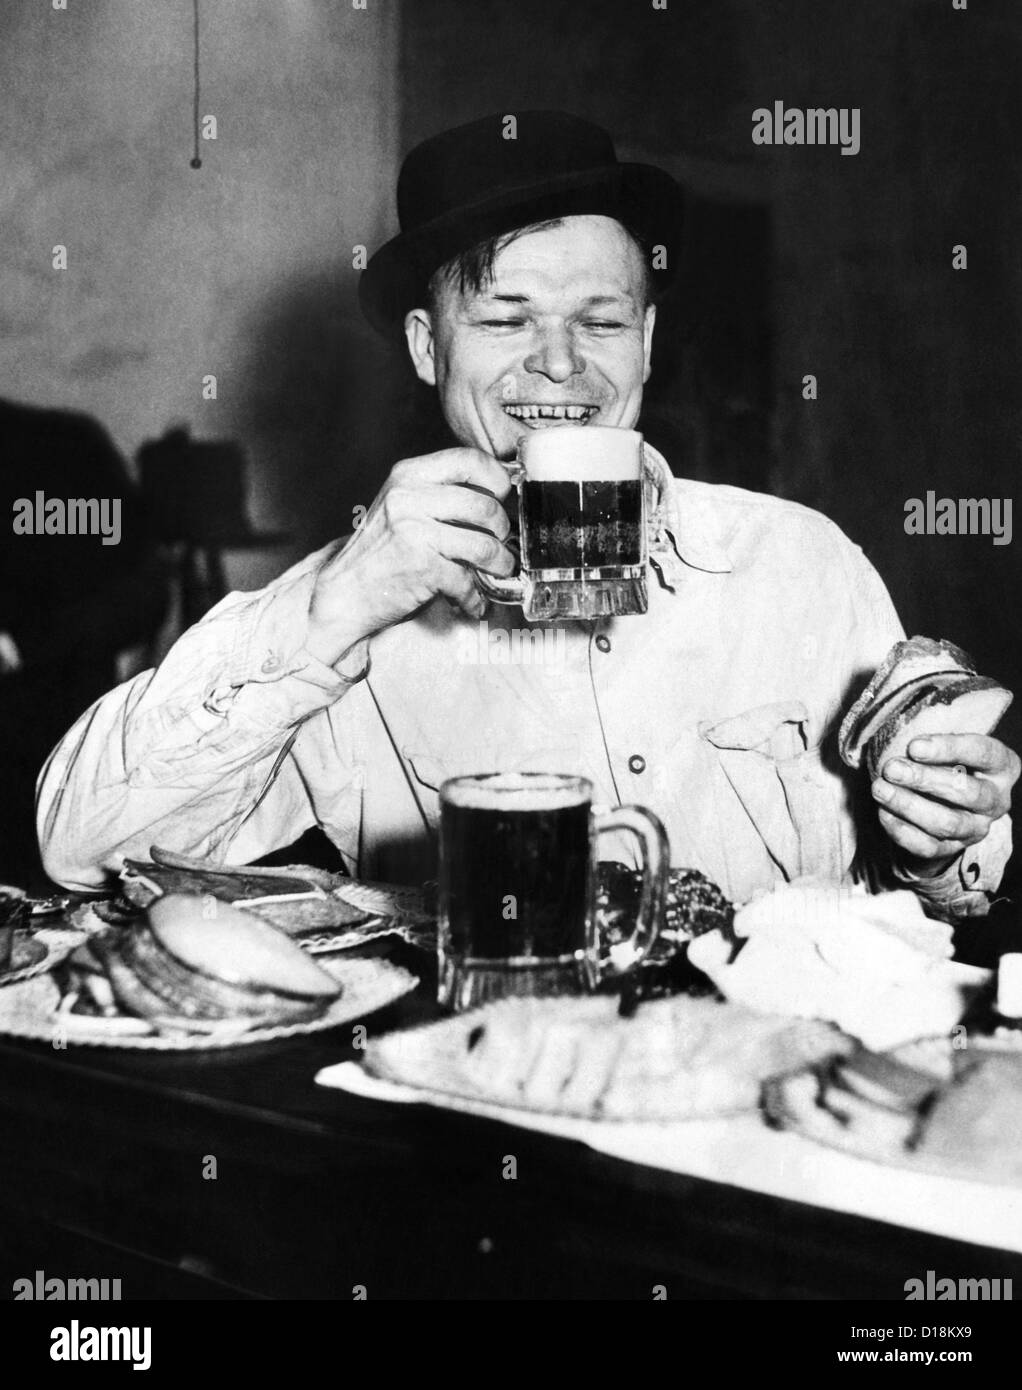 chicago-worker-enjoys-a-saloon-lunch-that-provided-free-food-to-go-D18KX9.jpg